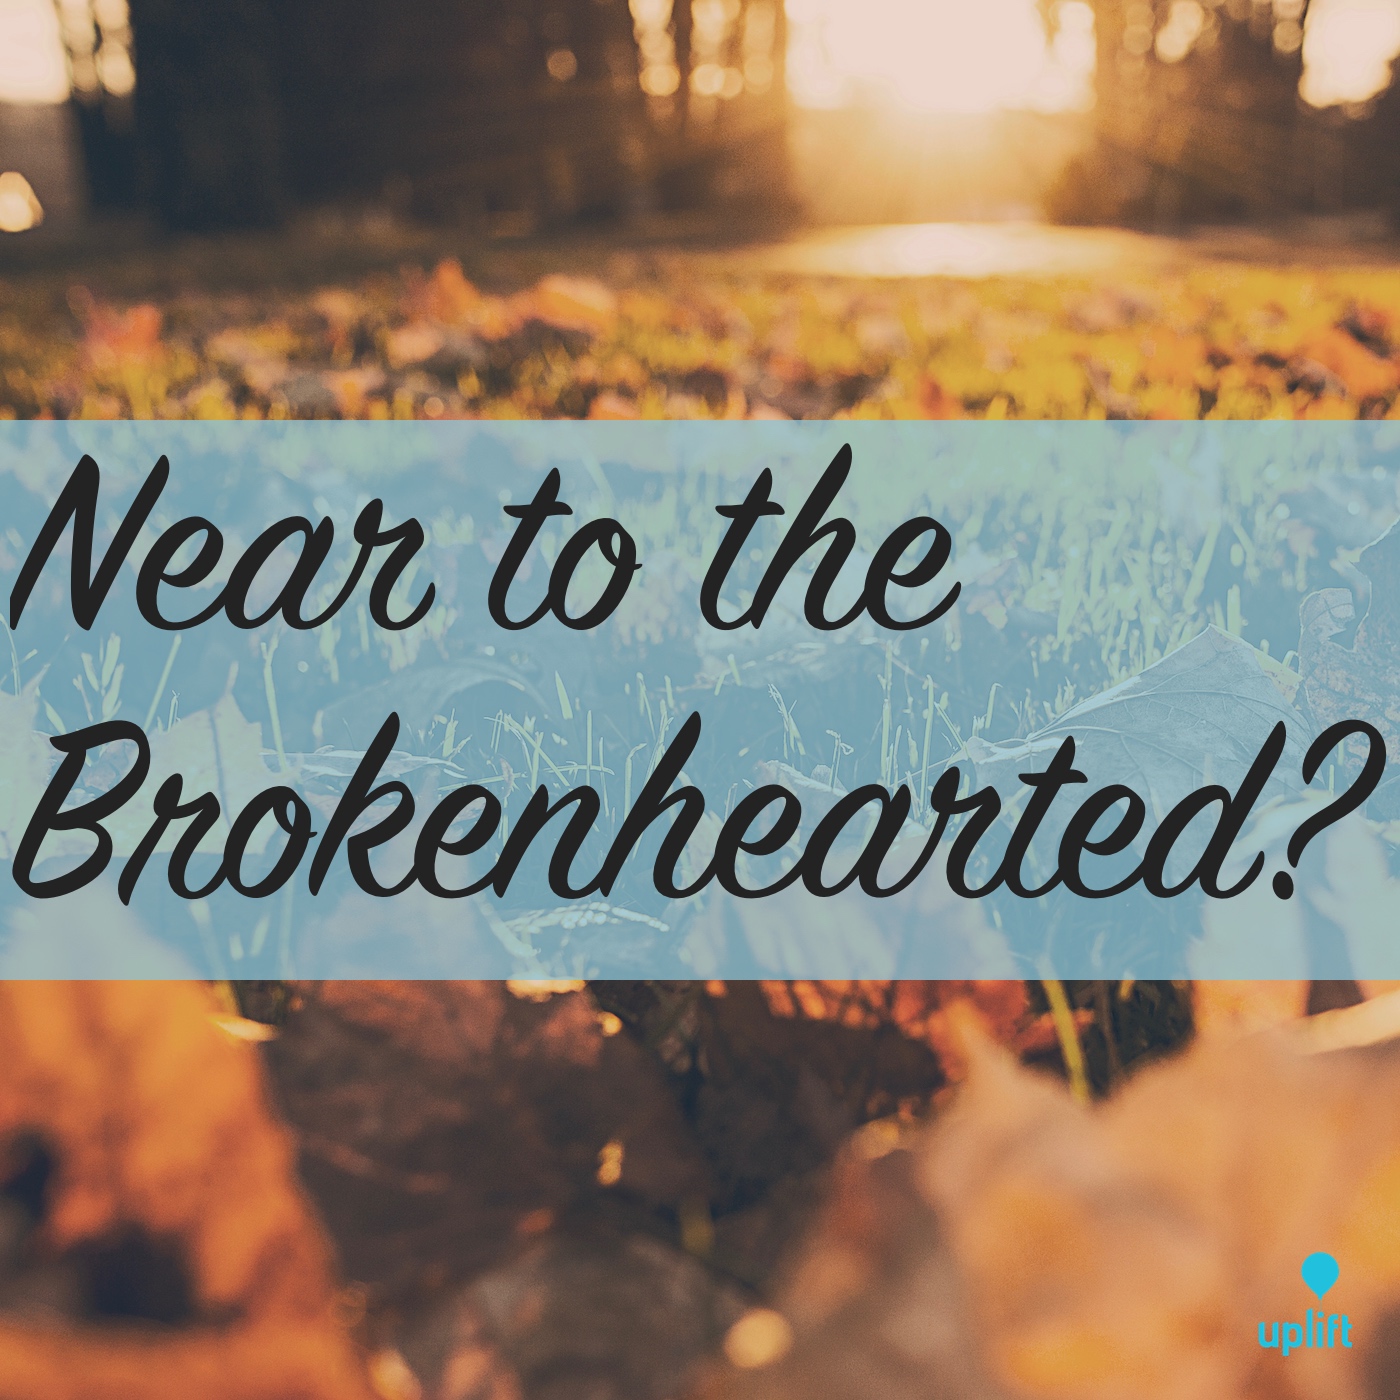 Episode 30: Near to the Brokenhearted?